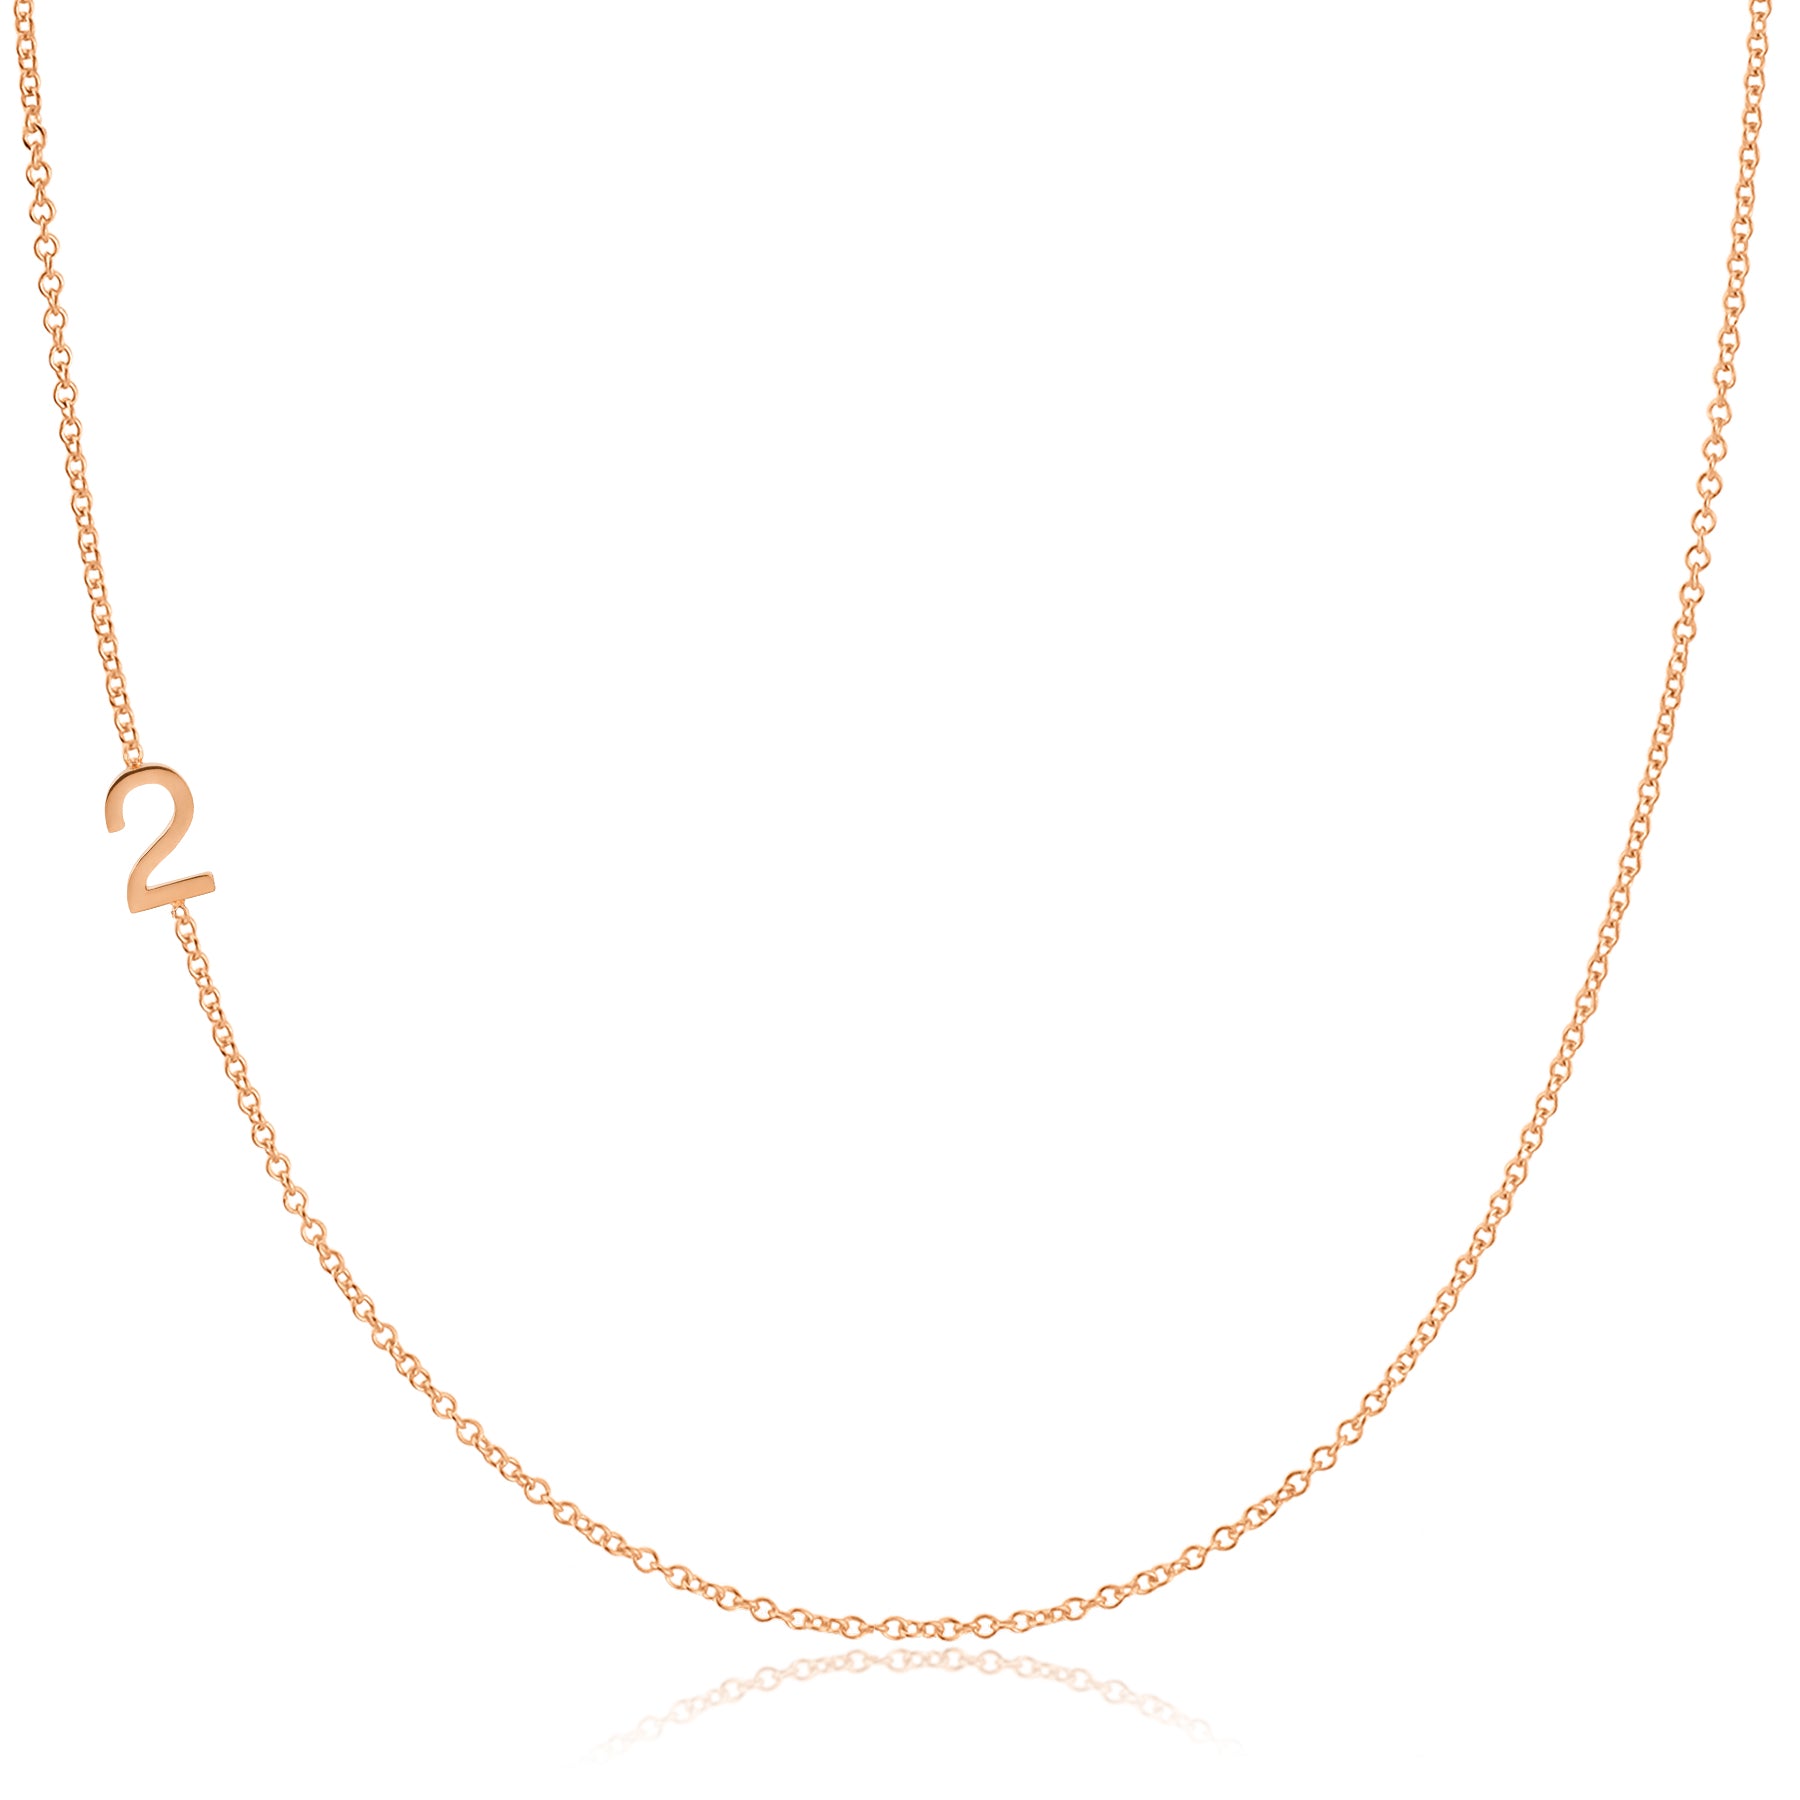 14K GOLD ASYMMETRICAL NUMBER NECKLACE - 2